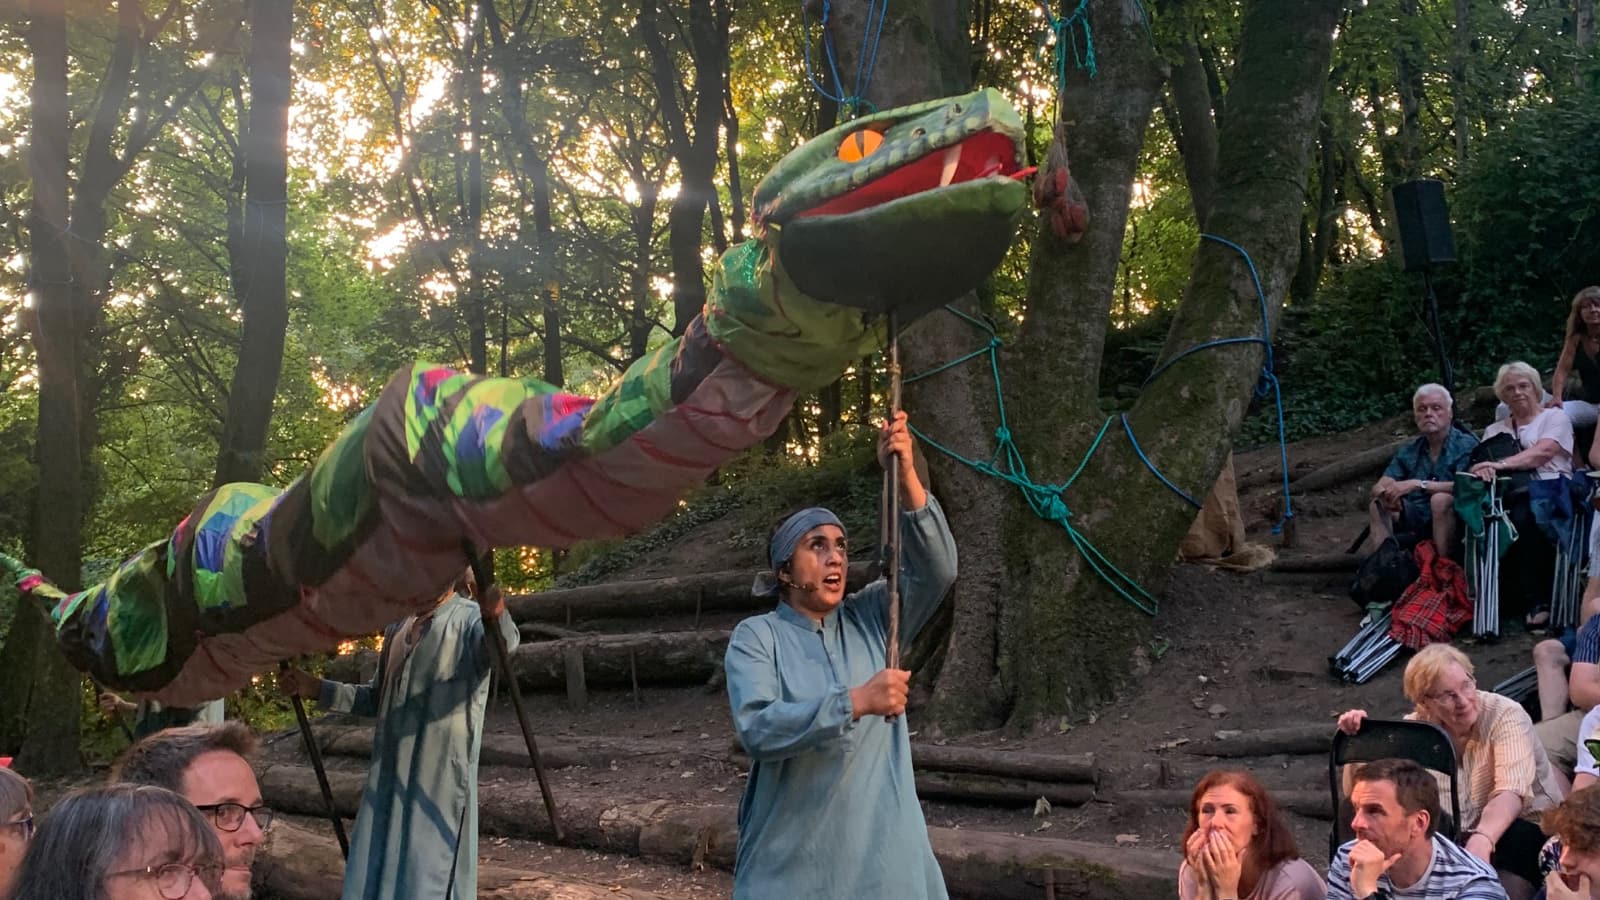 Actors manipulate a giant snake puppet in a wooded glade.